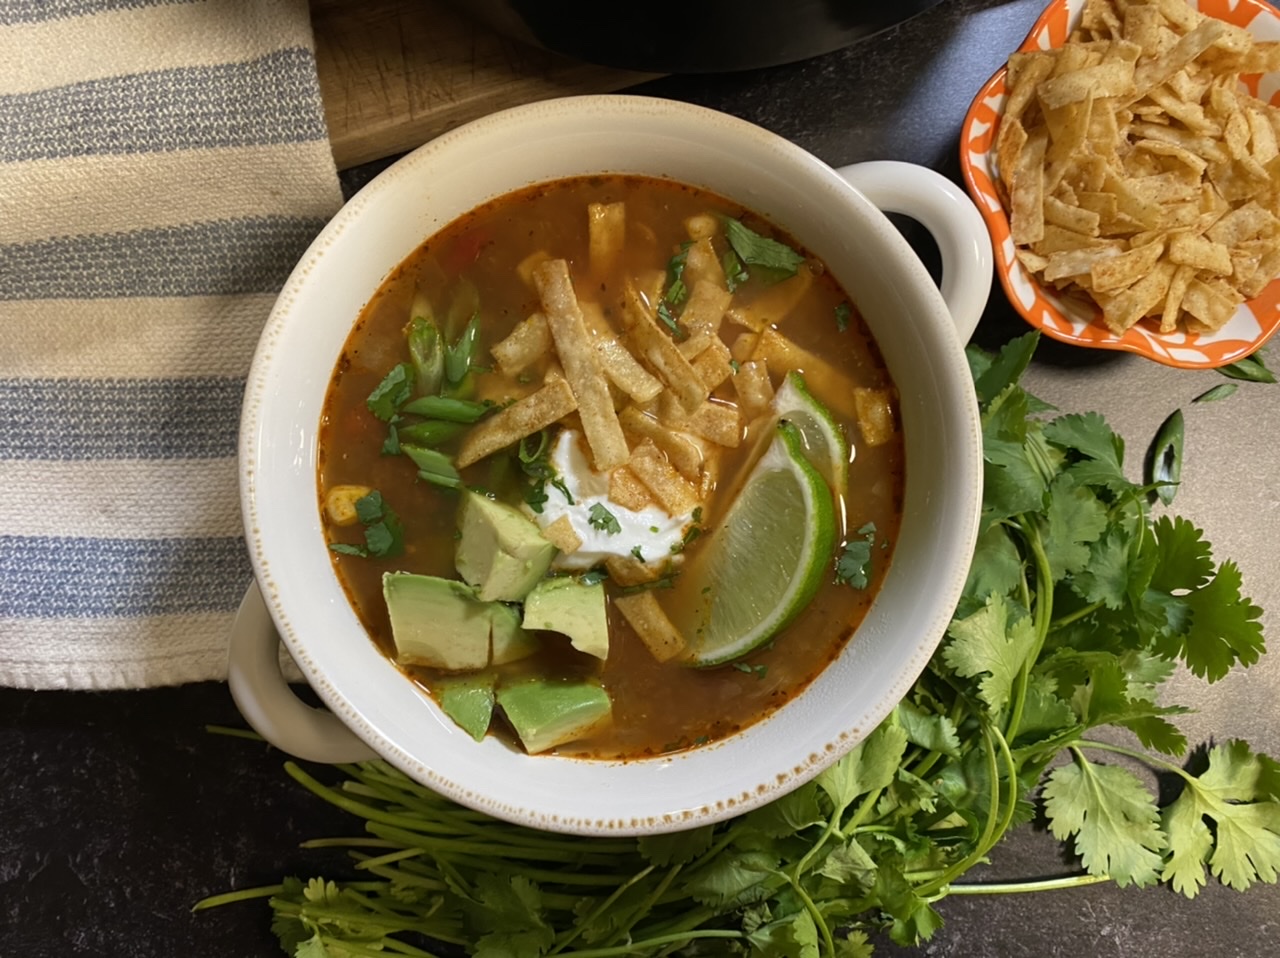 Chicken tortilla soup in a bowl on a blue and white towel